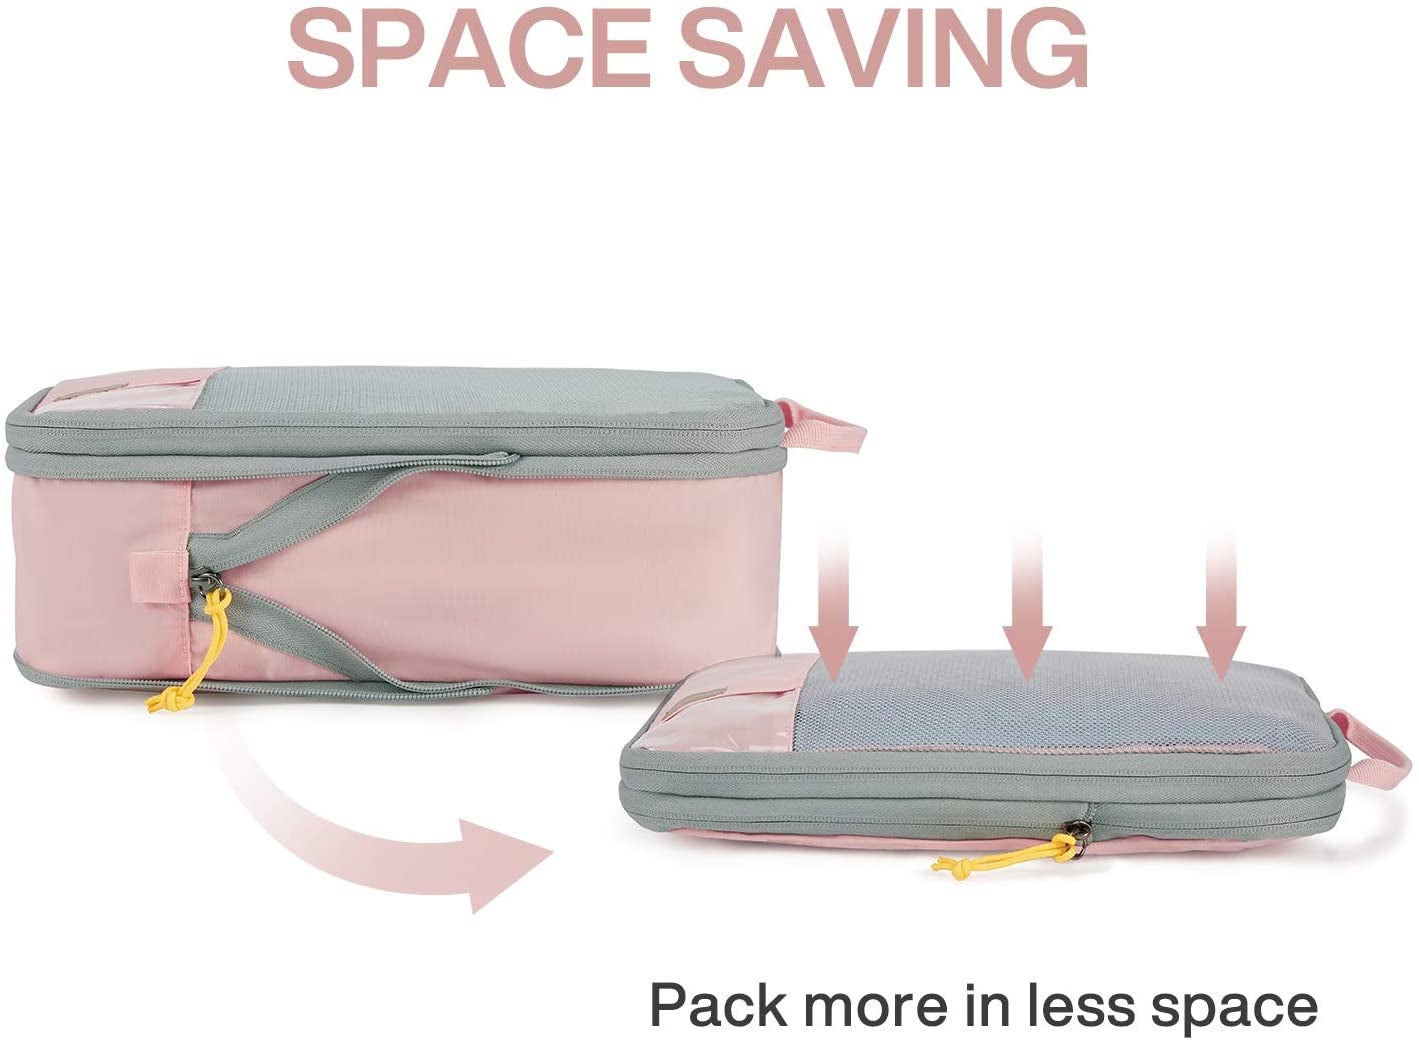 Smart Space-Saving Tips For Packing your Luggage - Traveler´s Buddy